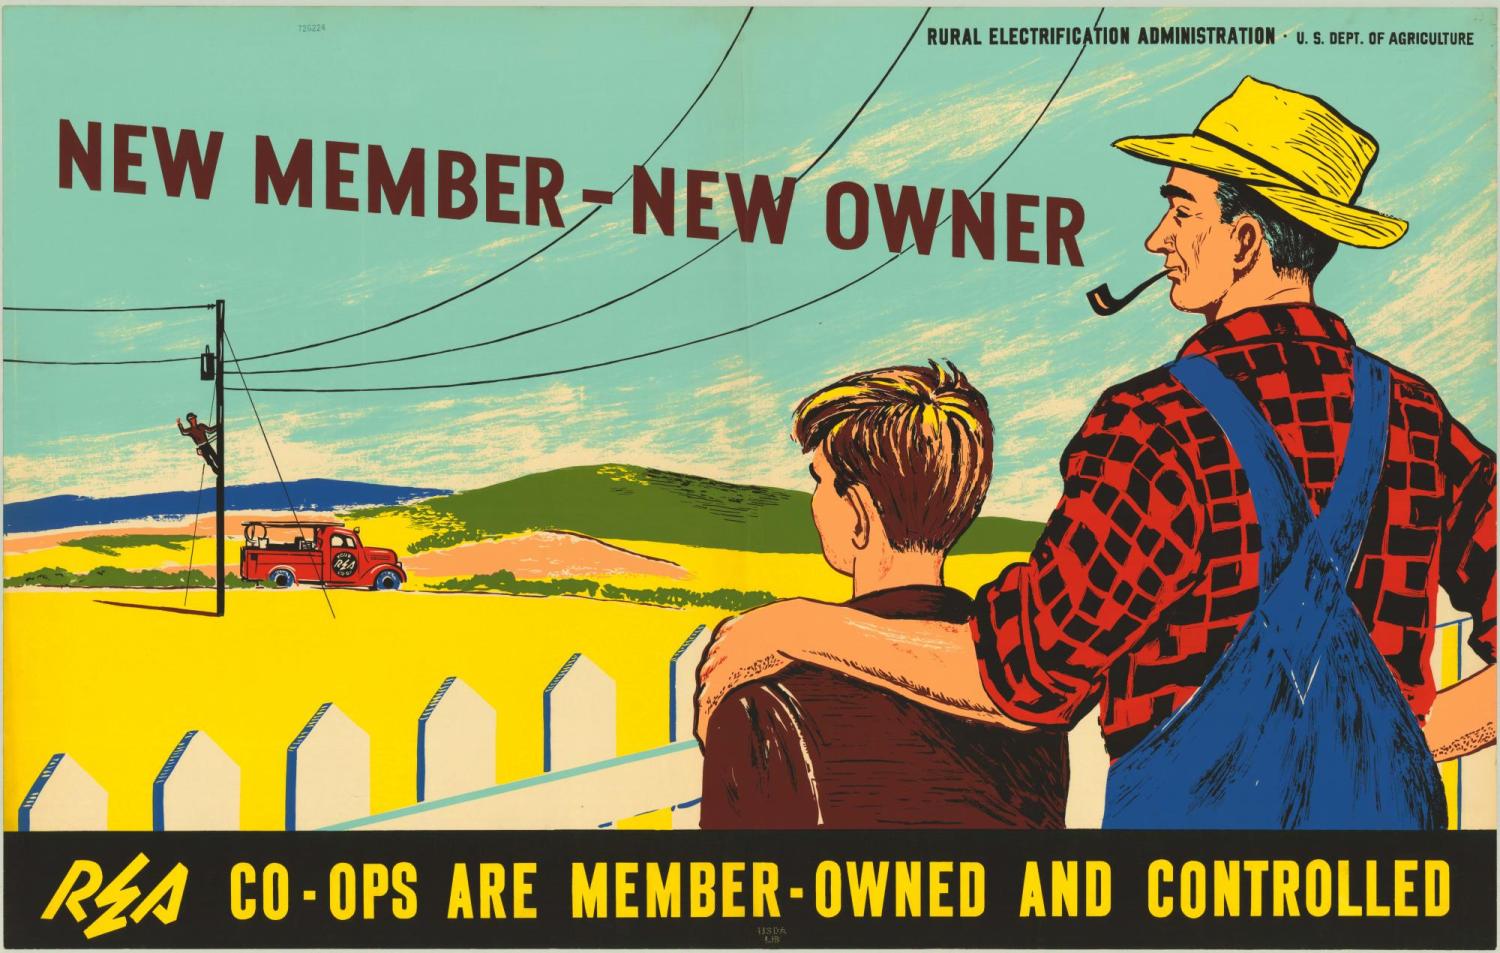  'New member, new owner. Co-ops are member-owned and -controlled."